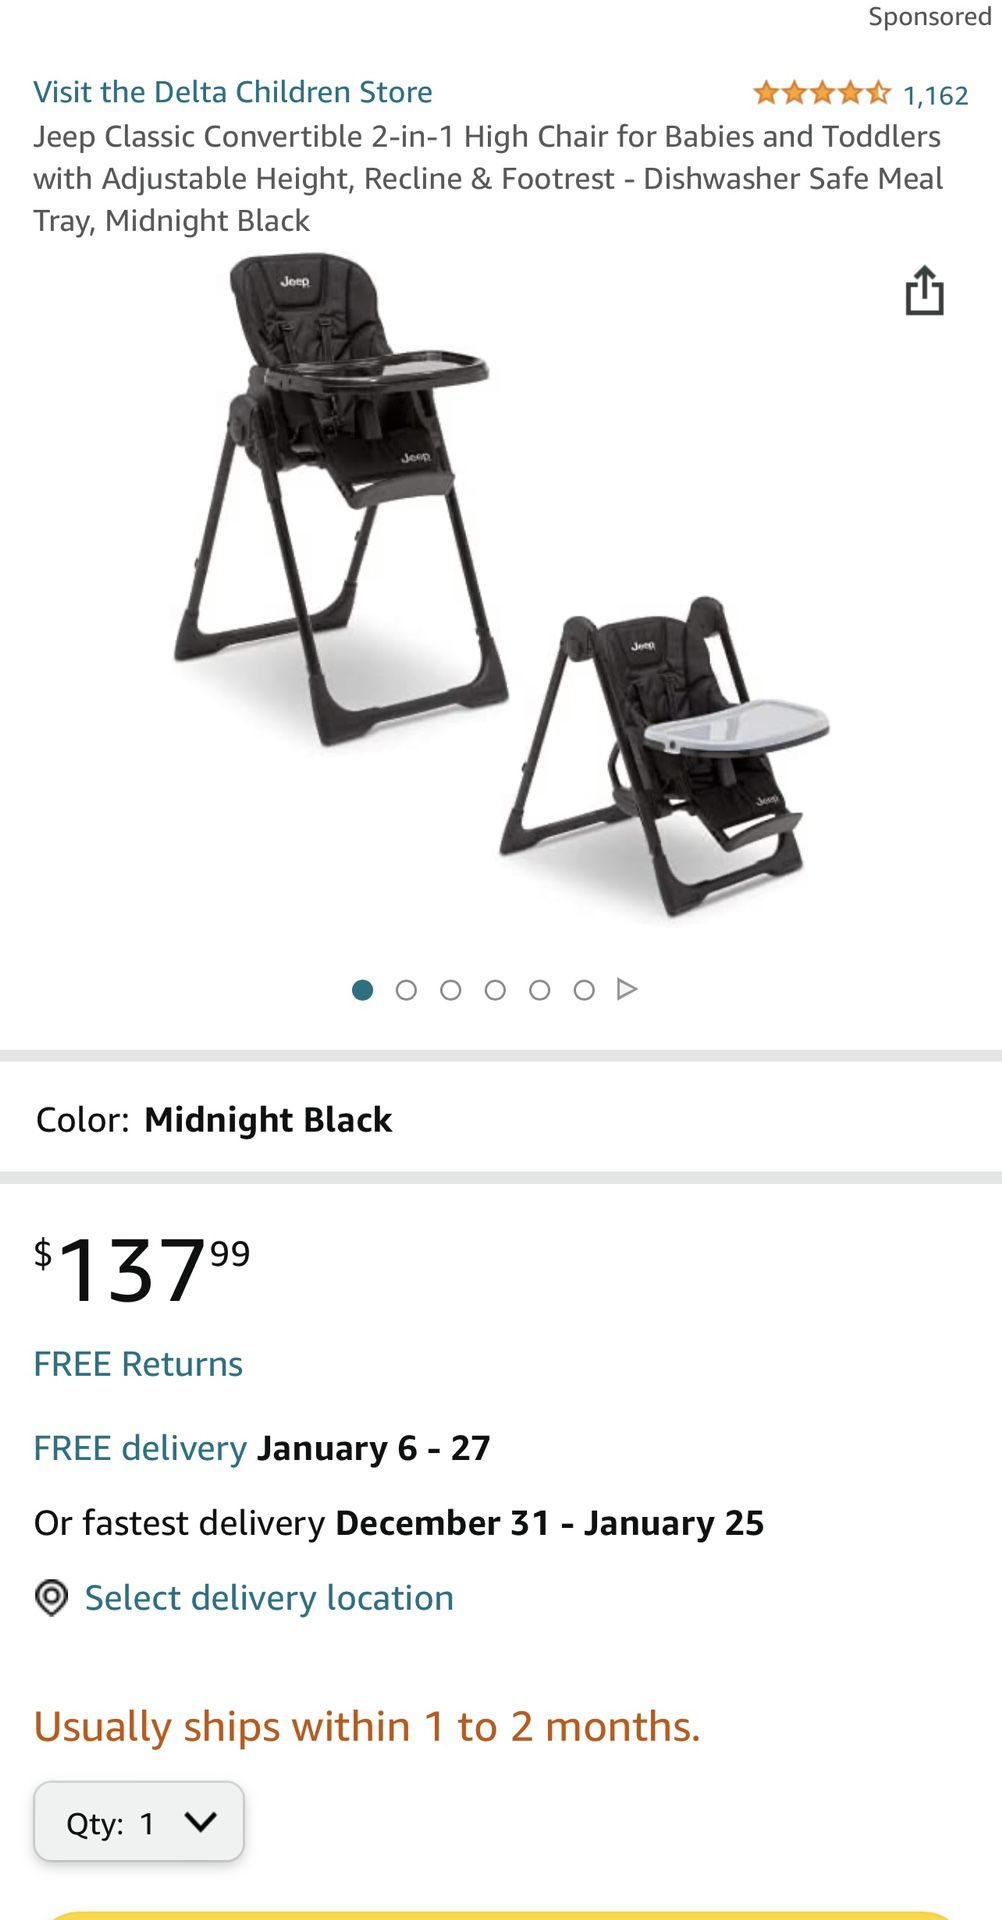 Jeep Classic Convertible 2 in 1 High Chair